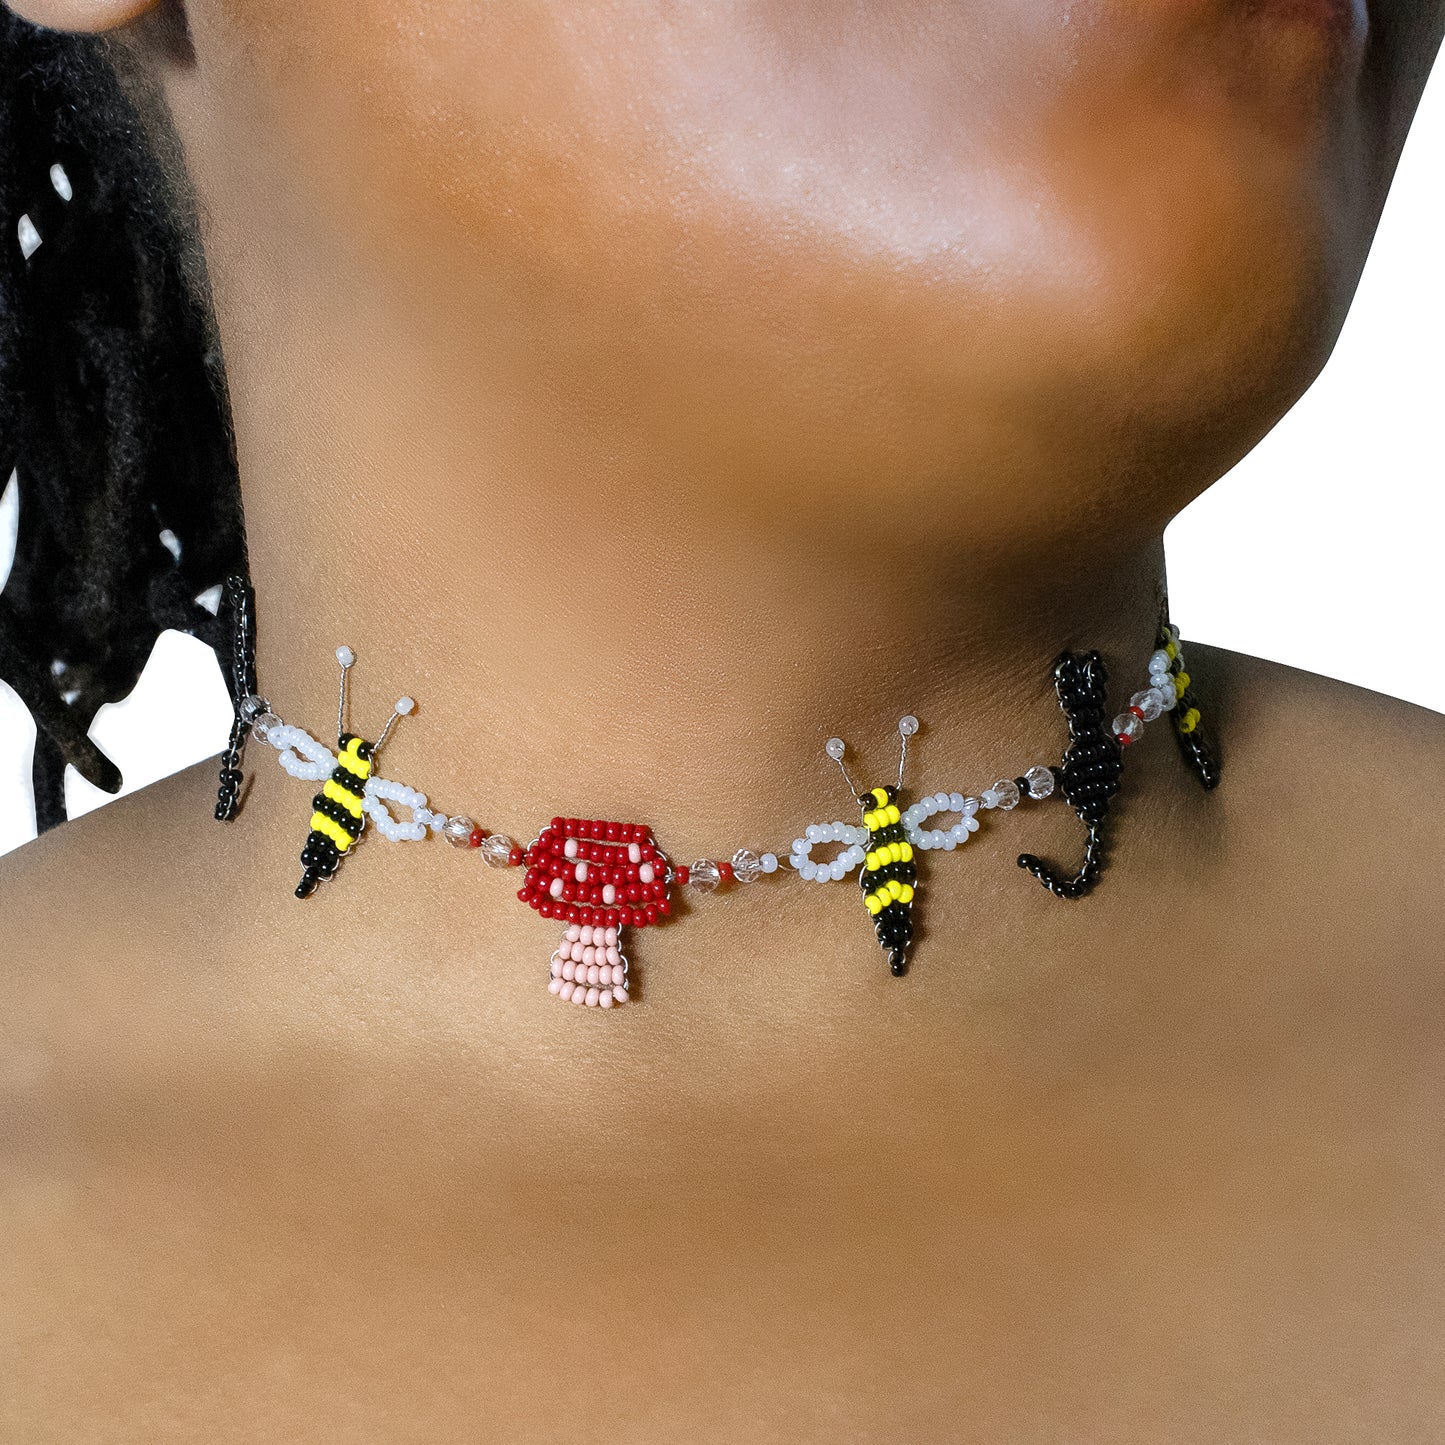 Bees mushrooms necklace